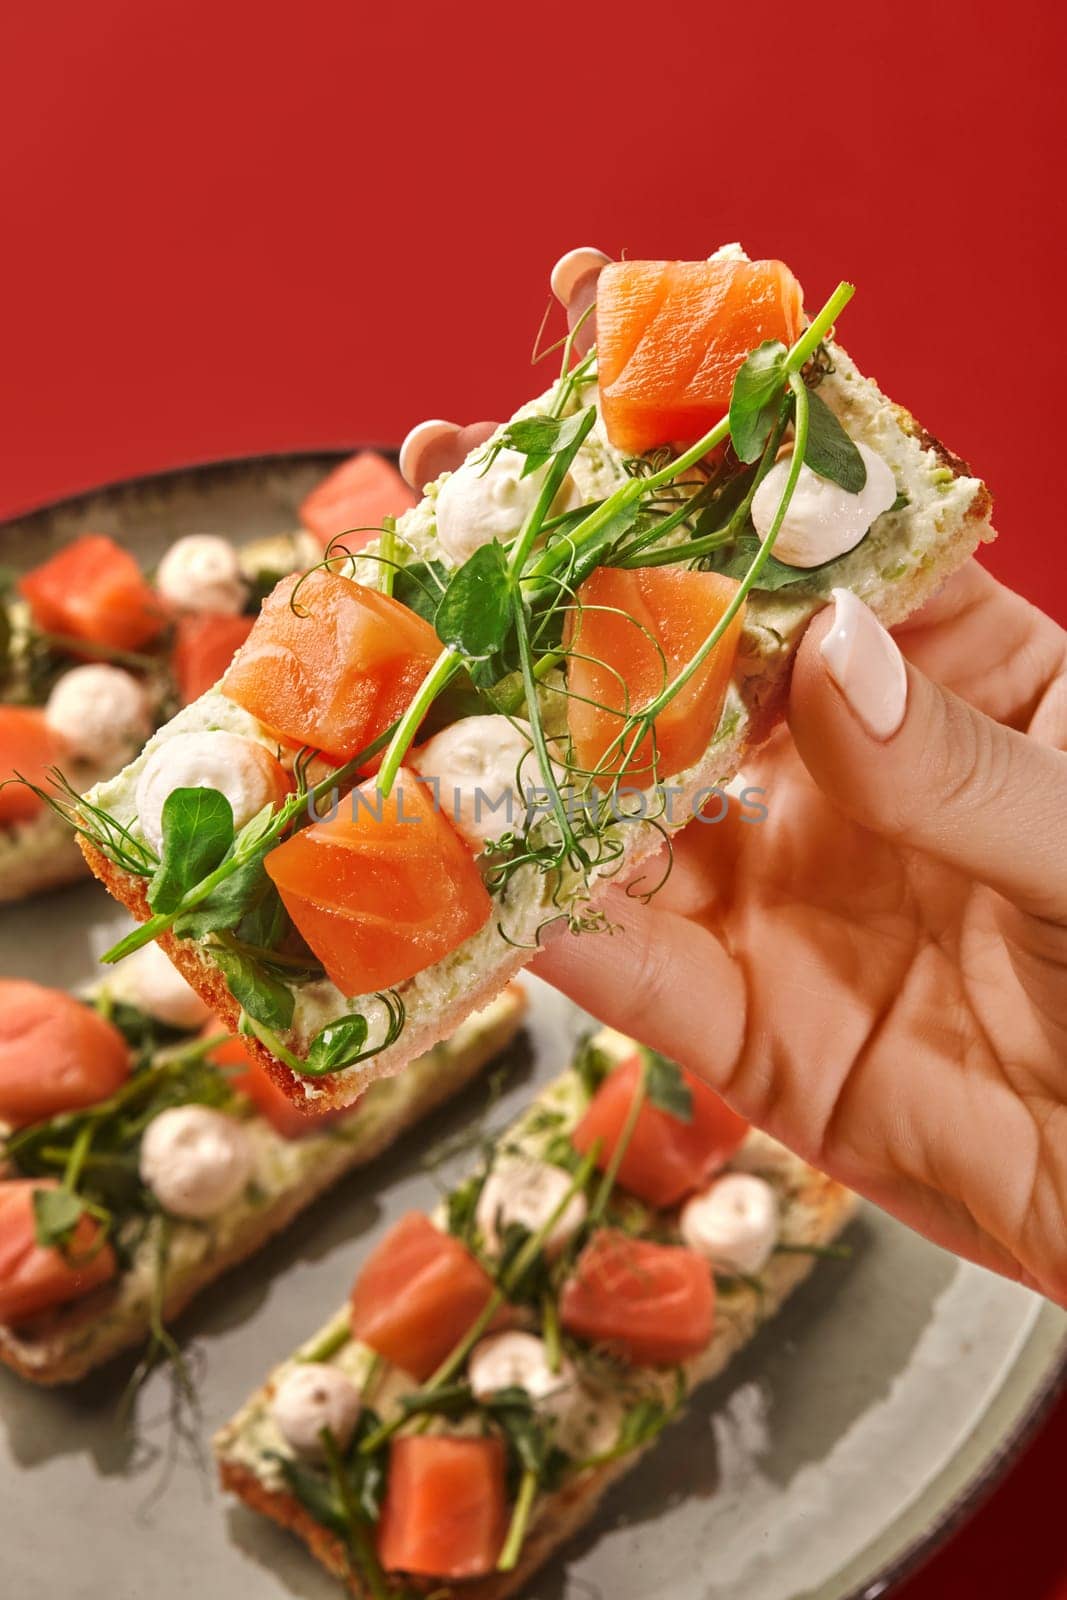 Female hand elegantly taking from plate appetizing crispy bruschetta topped with cream cheese, salmon gravlax, bocconcini and sprig of fresh herbs against red backdrop. Italian style snack